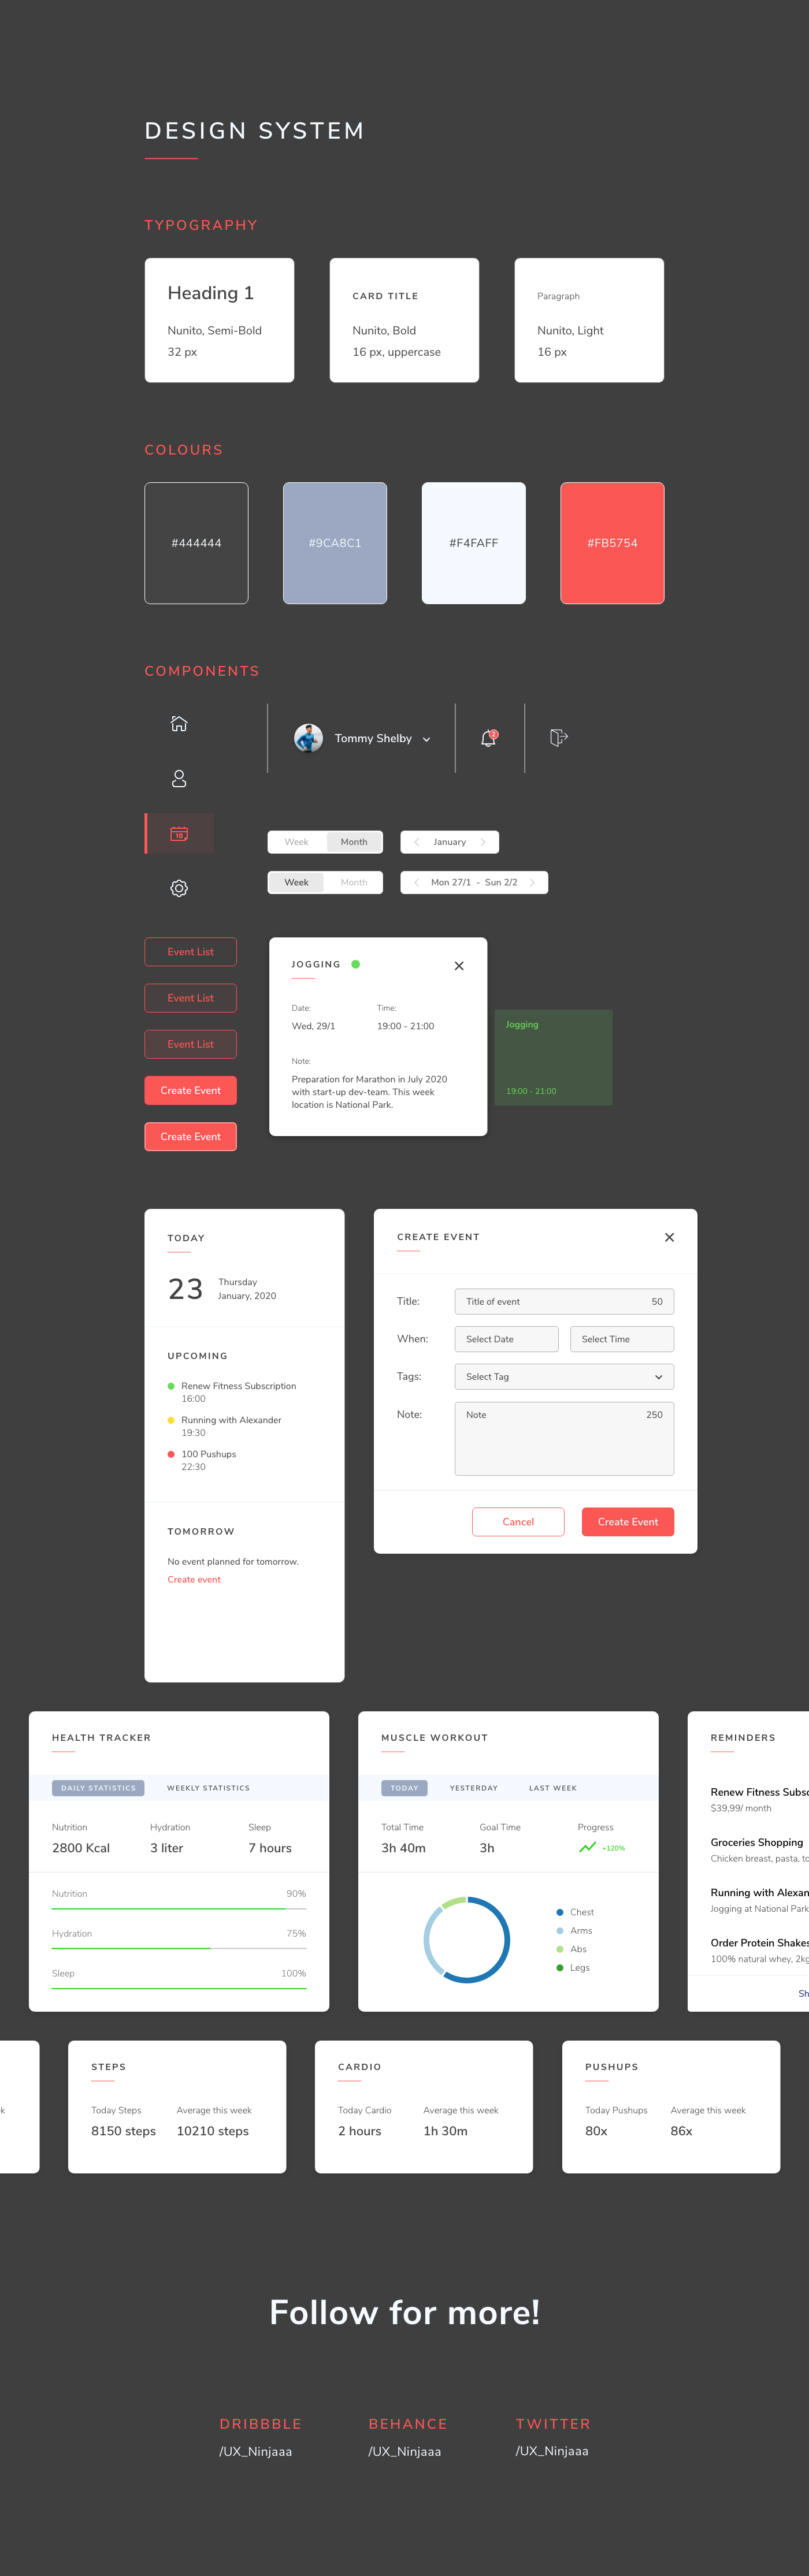 xddailychallenge dashboard UI components adobexd fitness tracking